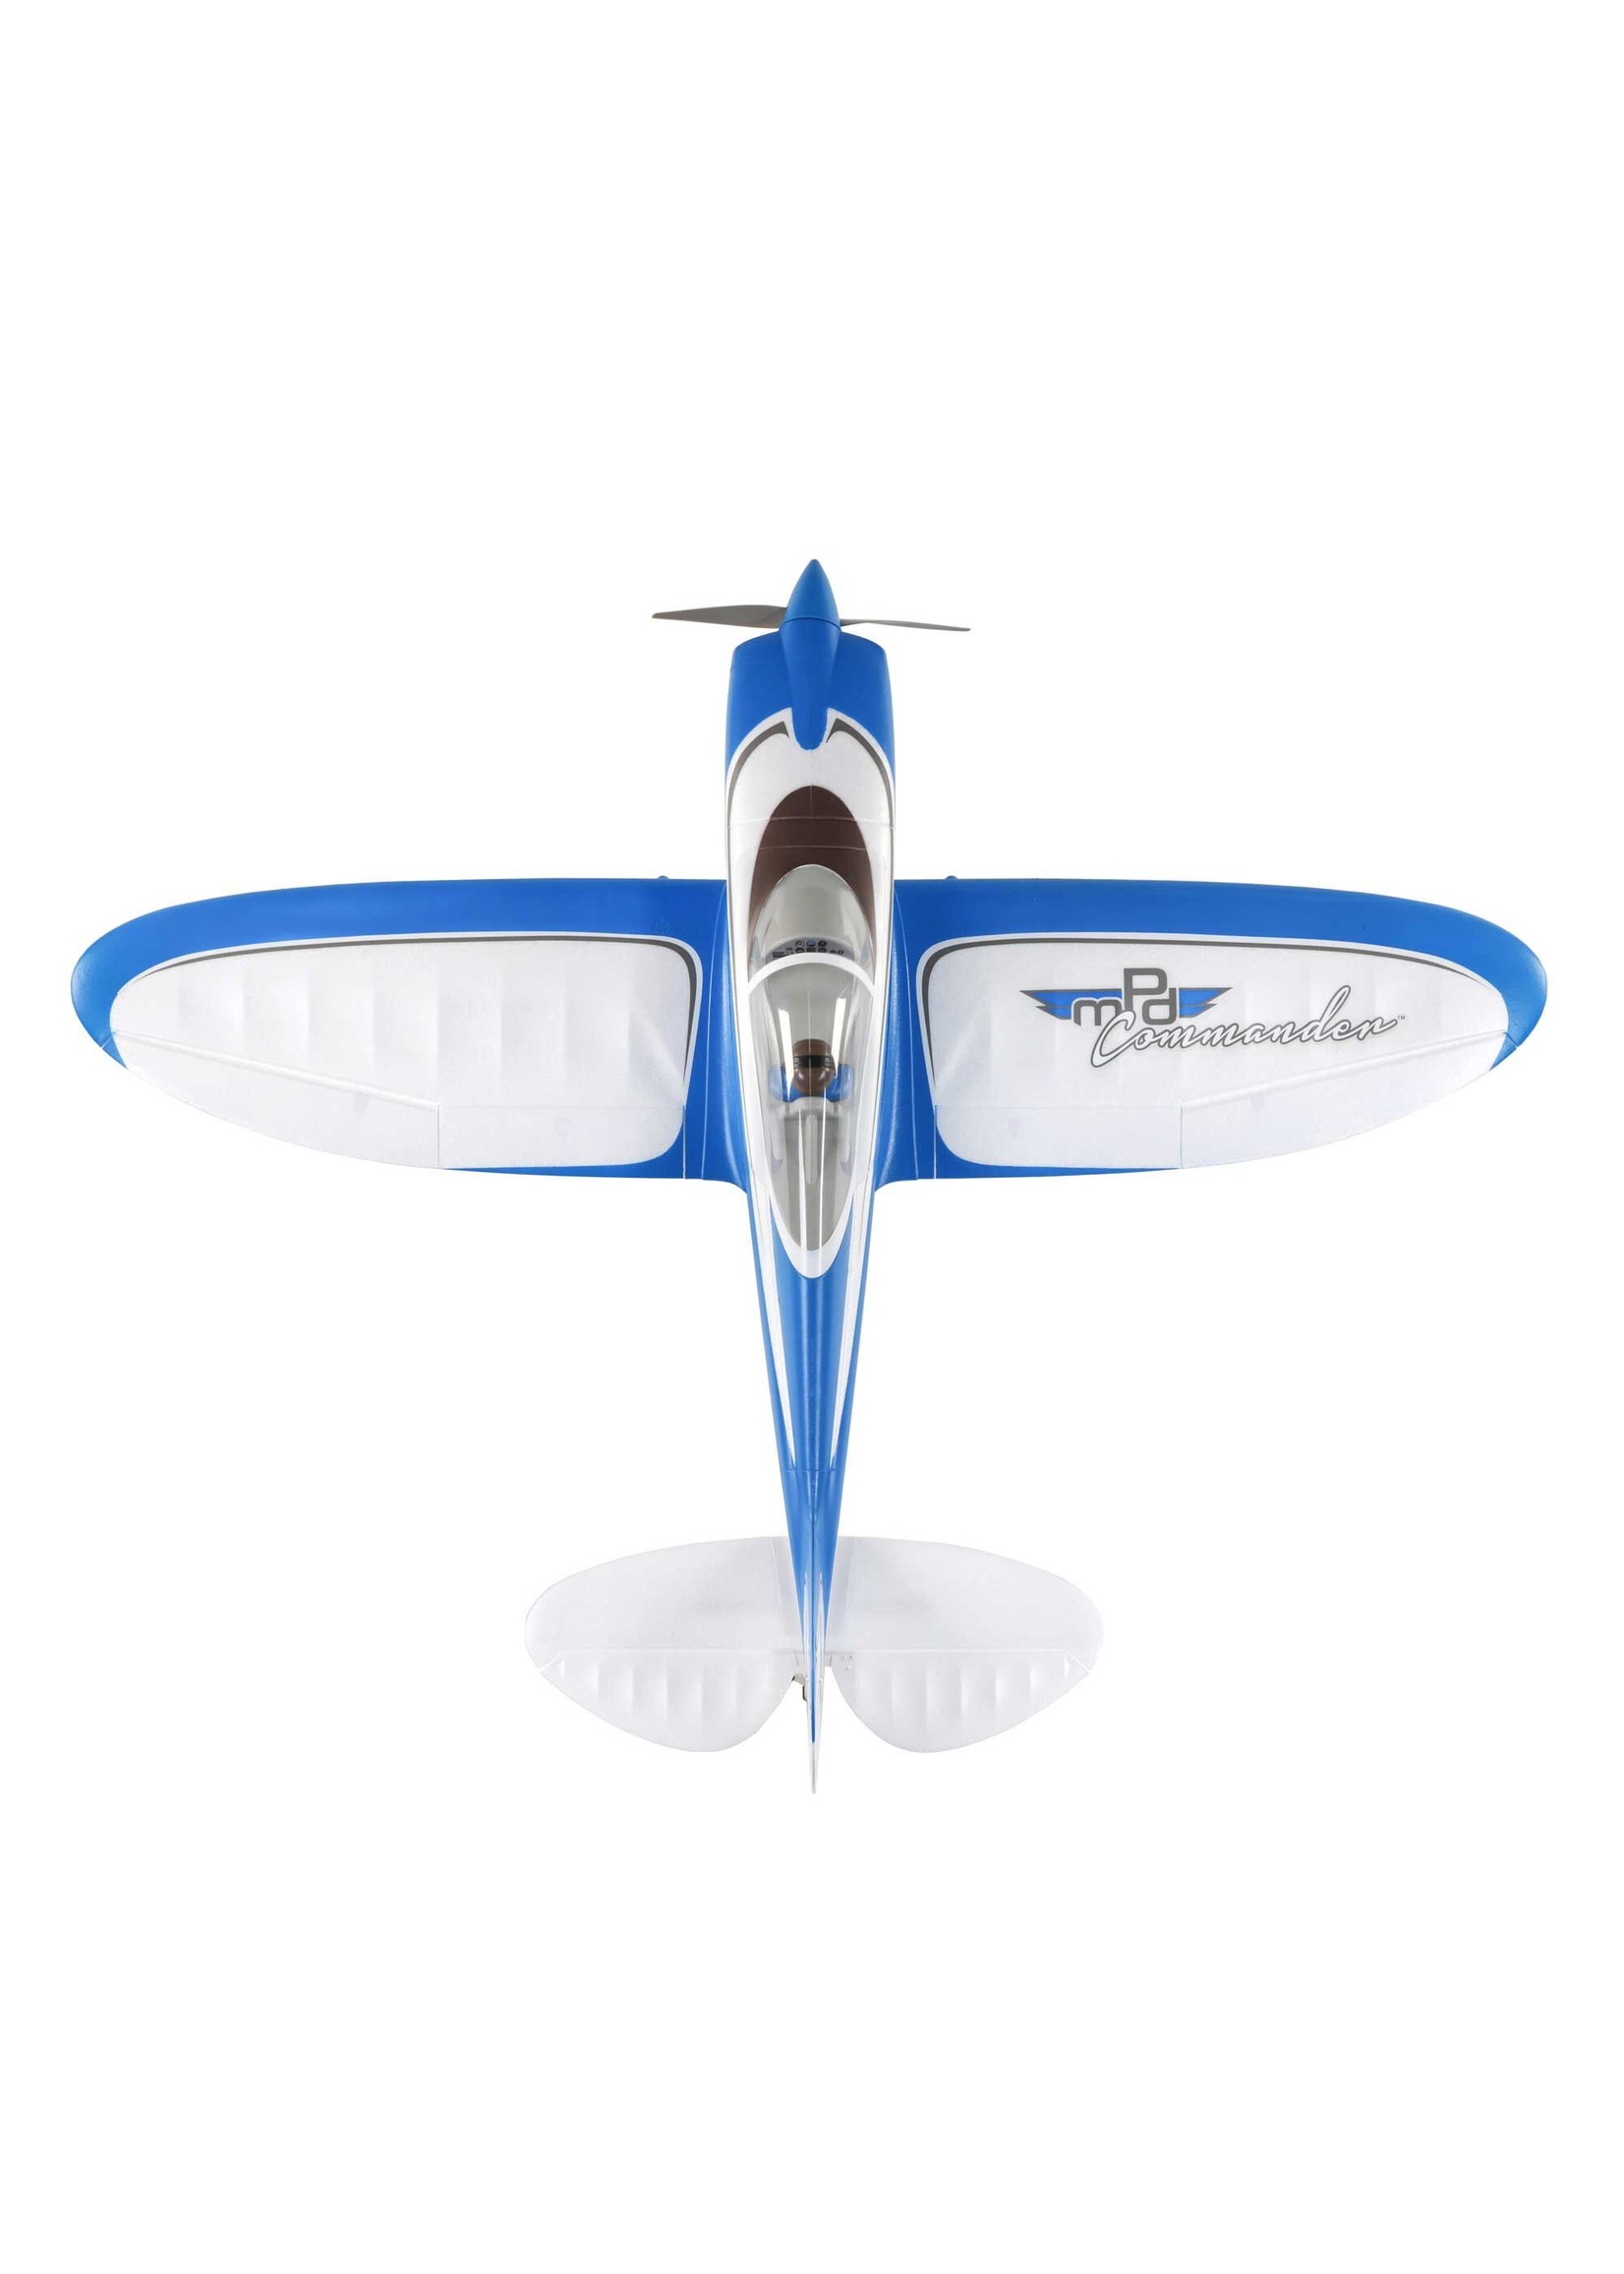 E-flite Commander mPd 1.4m BNF Basic with AS3X and SAFE Select